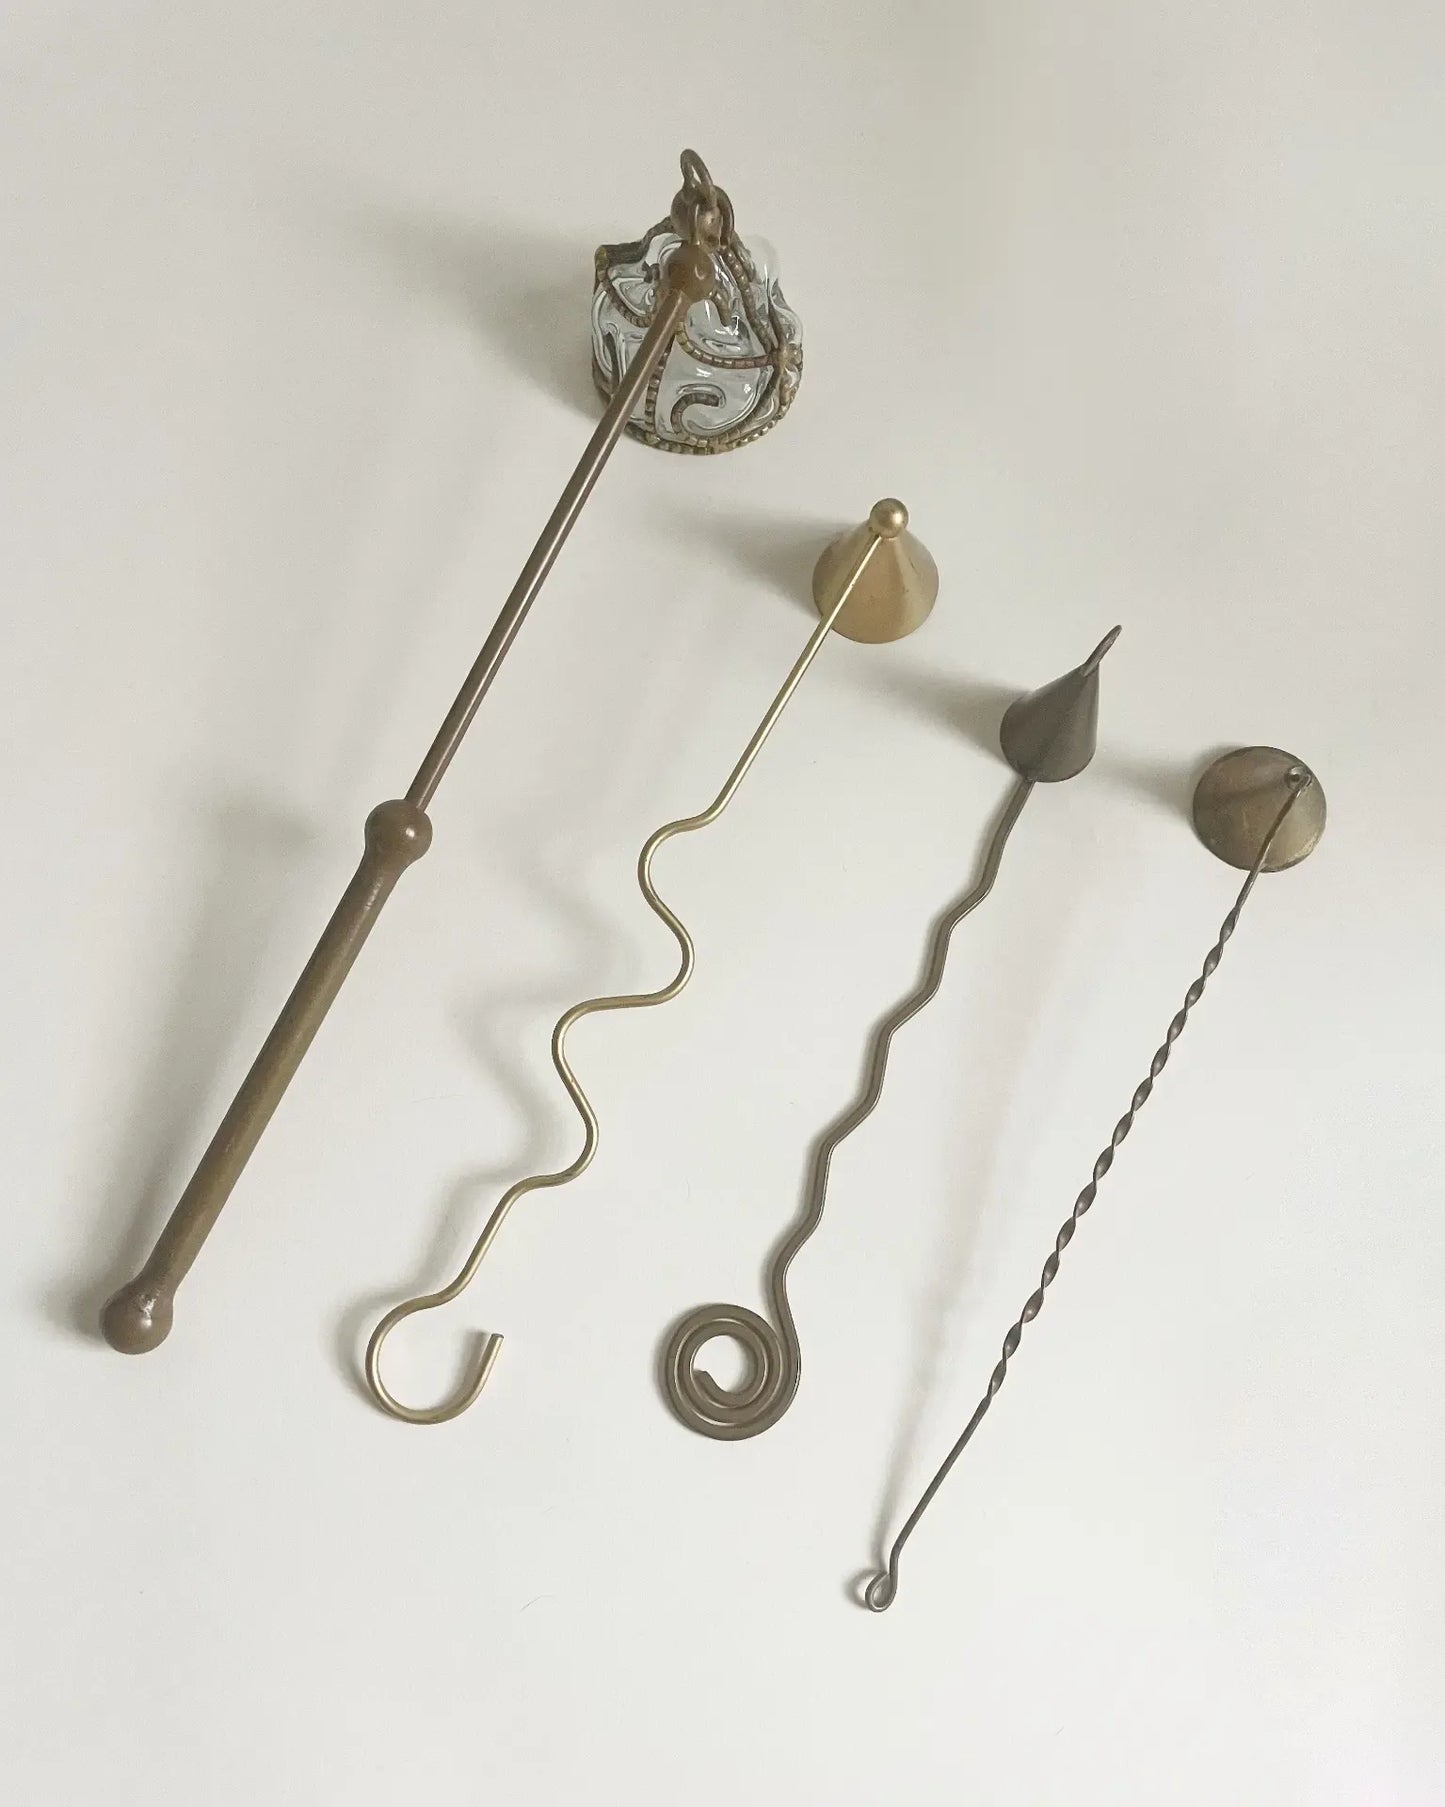 Four handmade, vintage brass candle snuffers in a row from largest to smallest